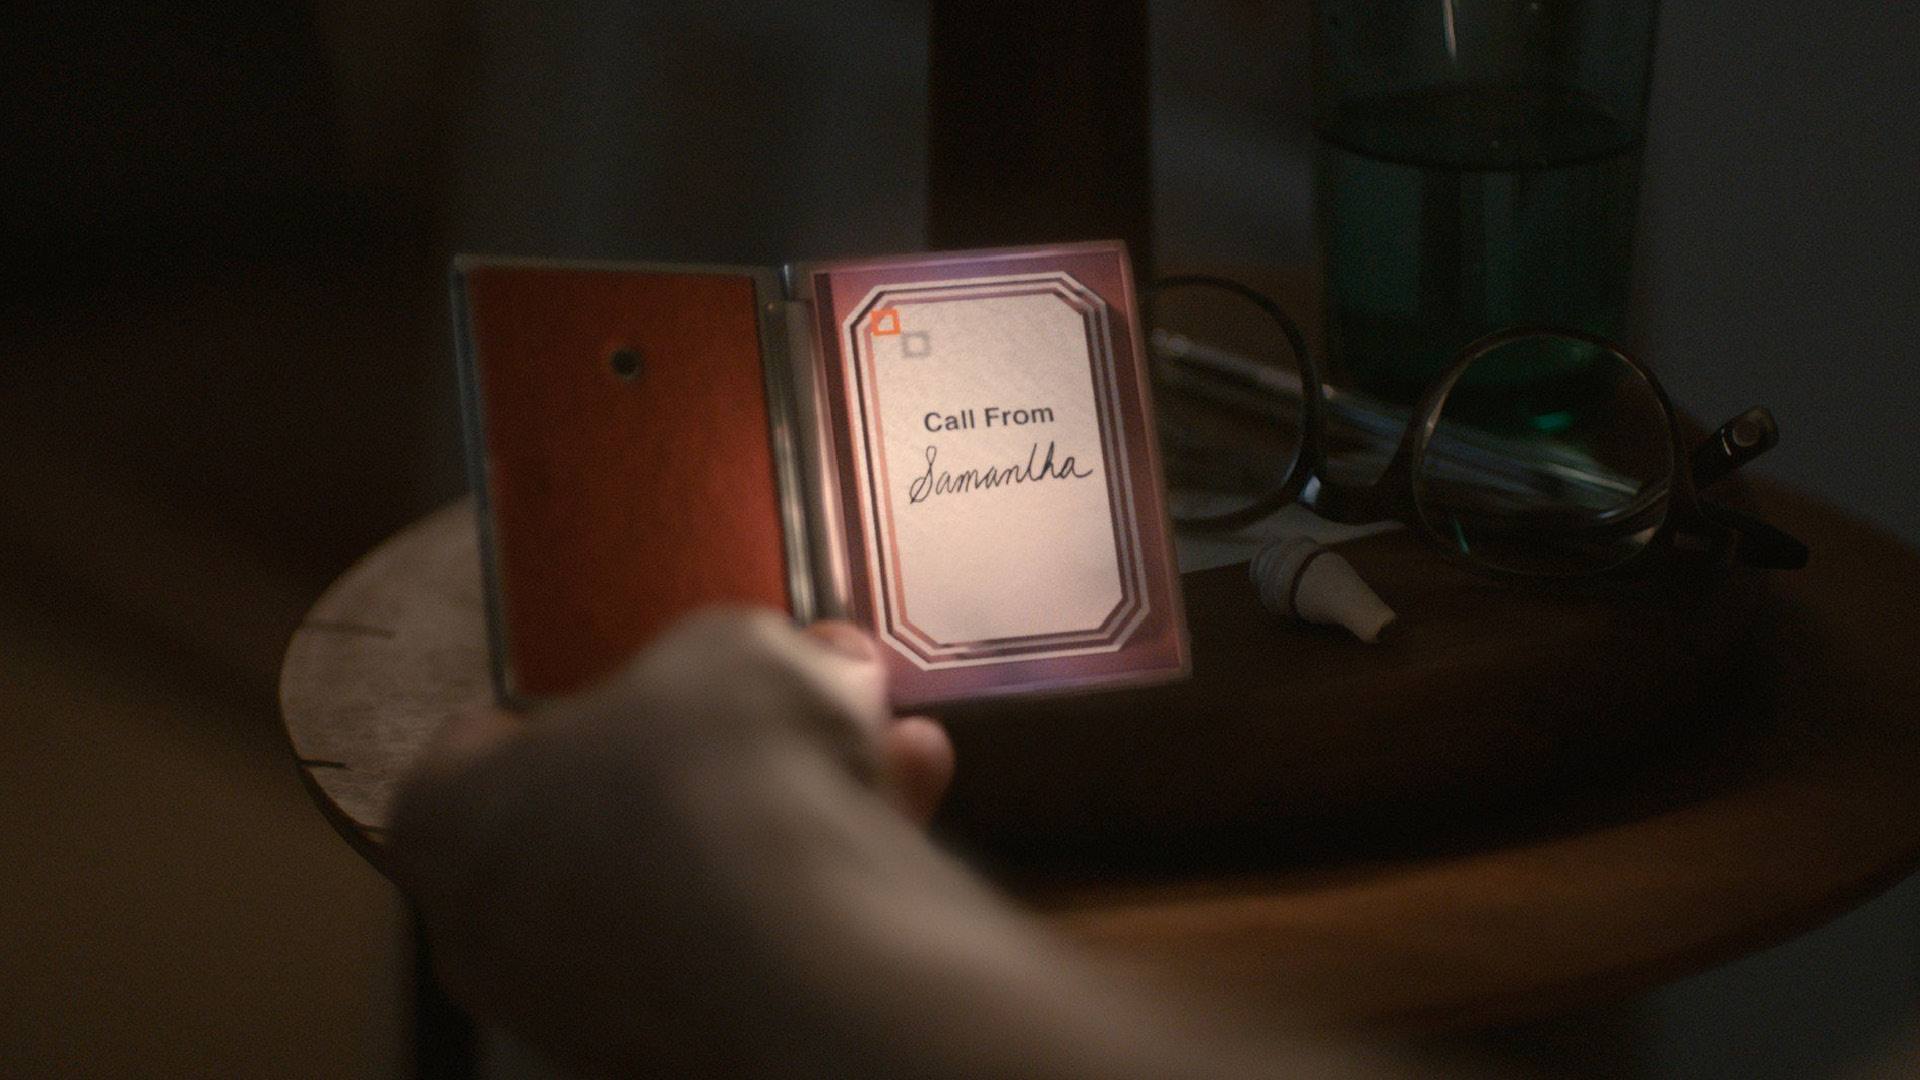 HER film still of a note that reads "Call from Samantha"